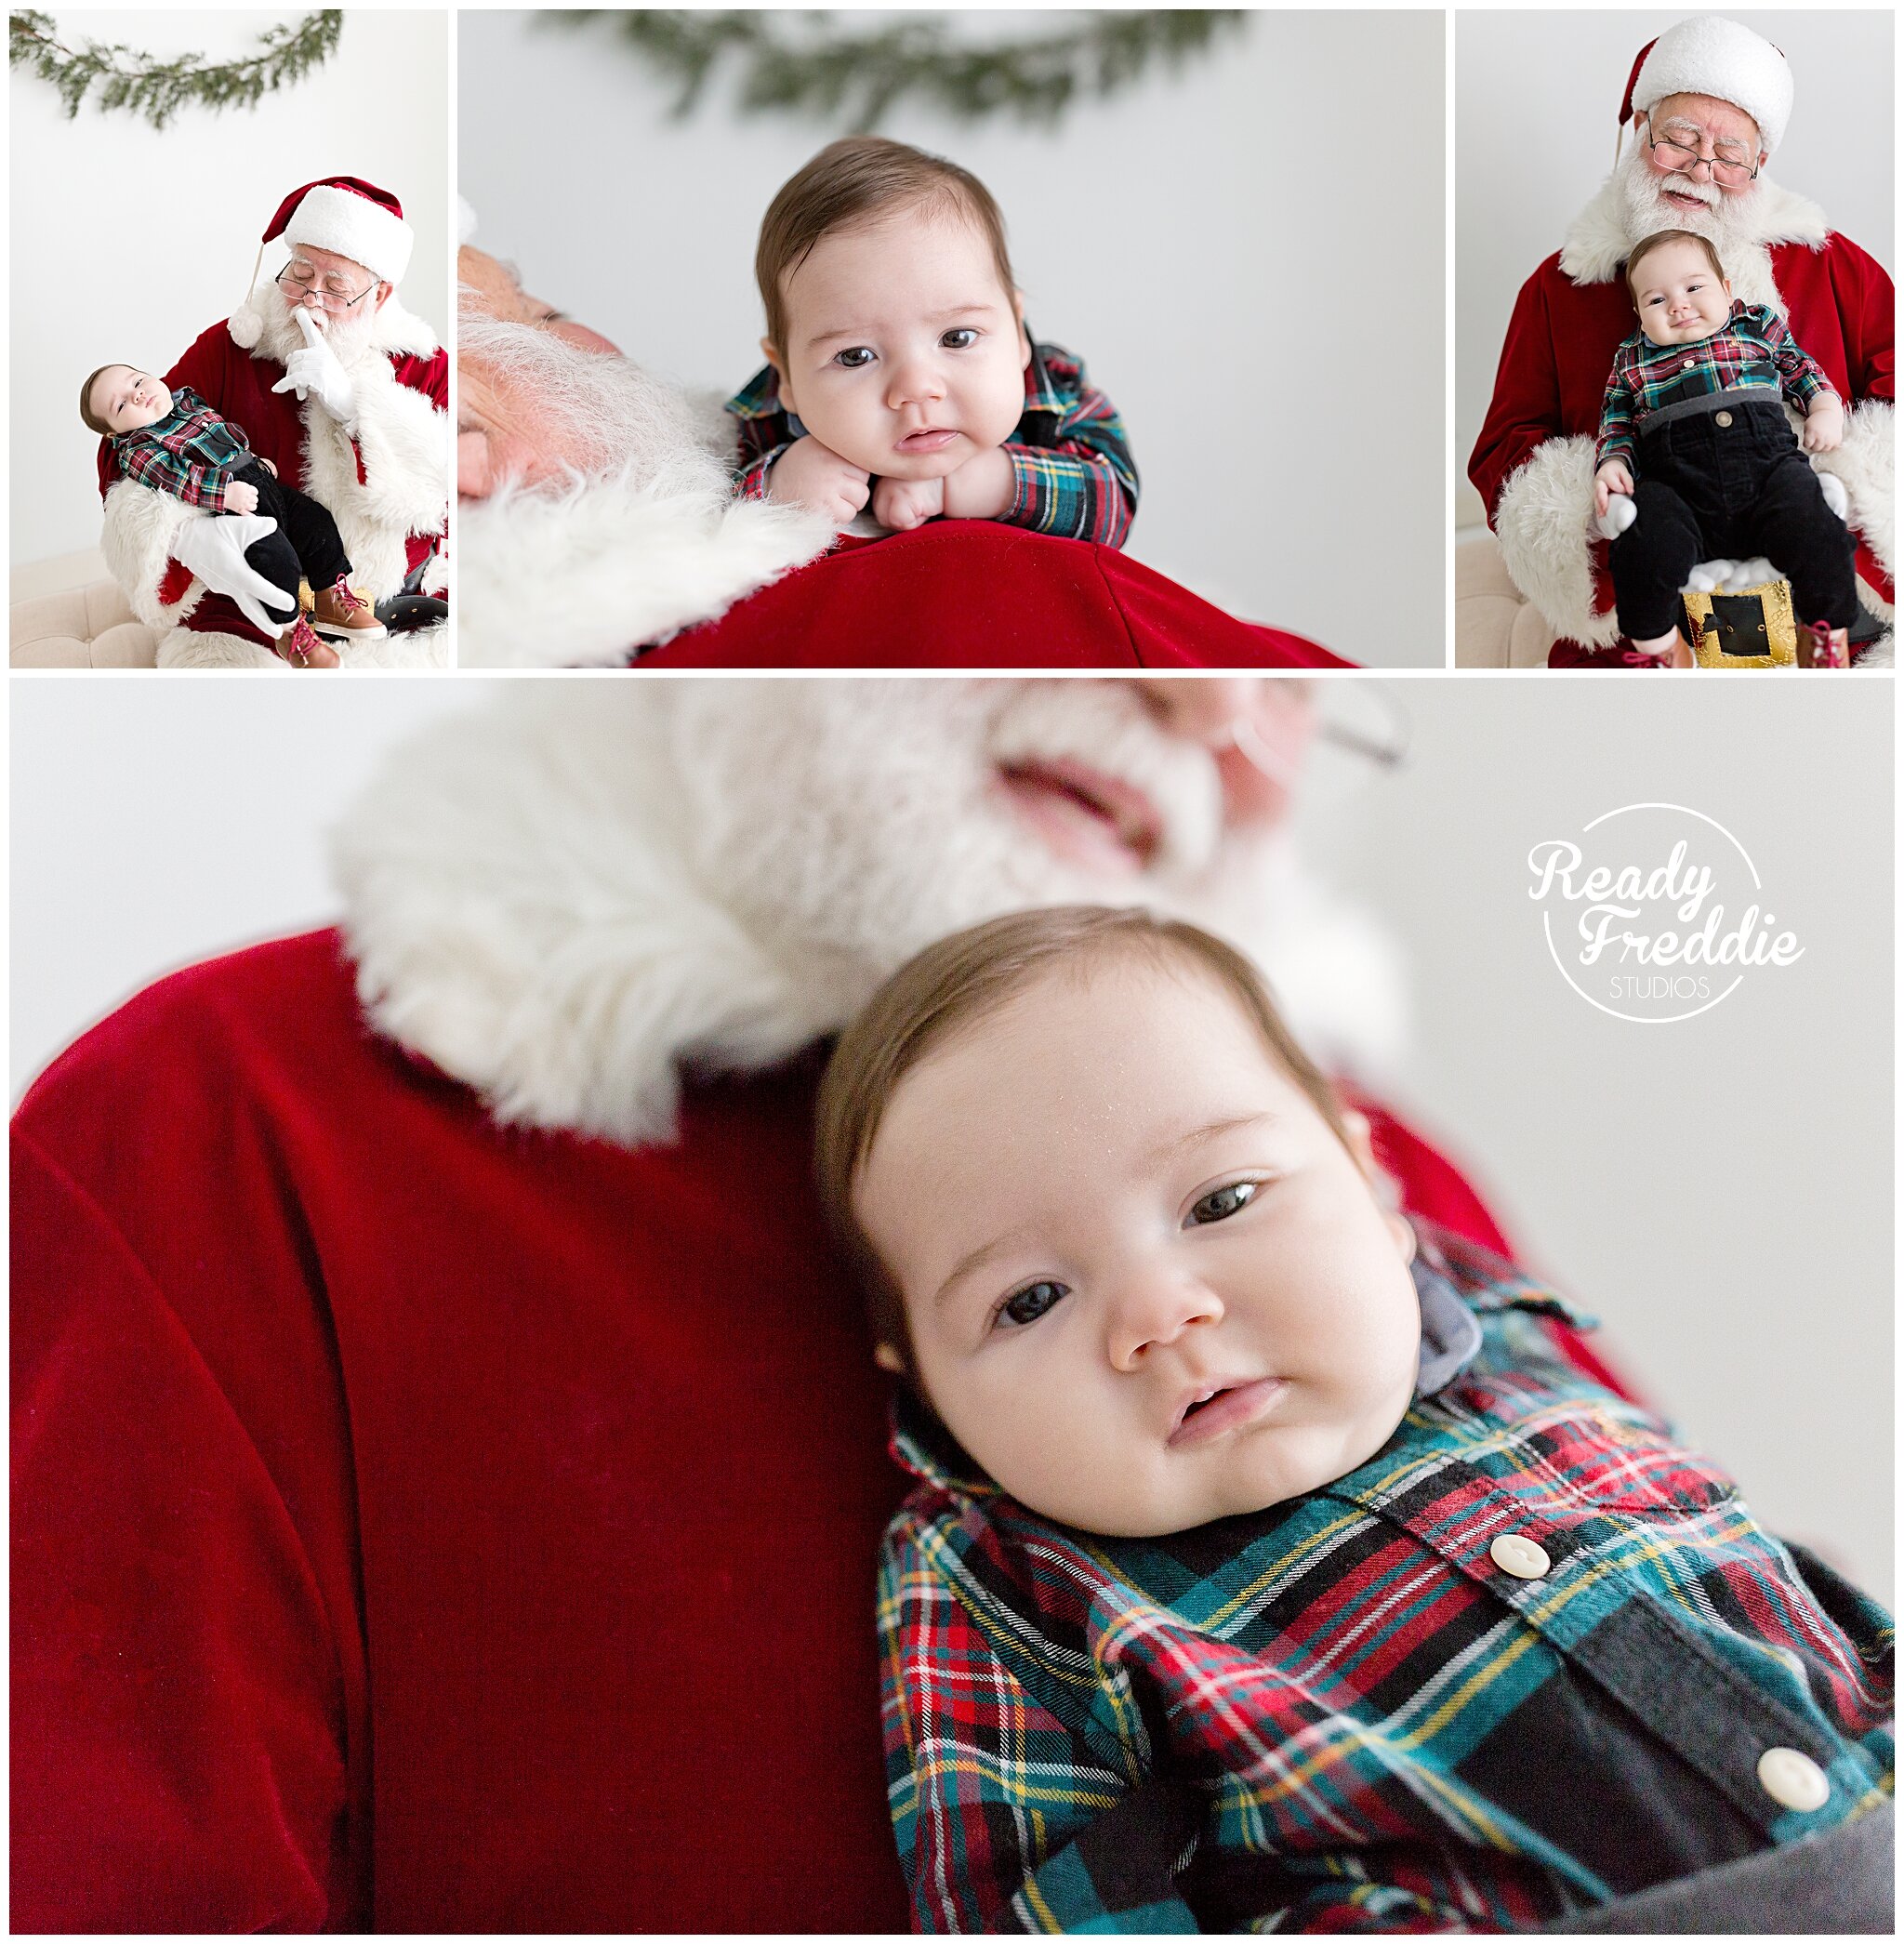 Baby's first Christmas Santa pictures with Ivanna Vidal Photography